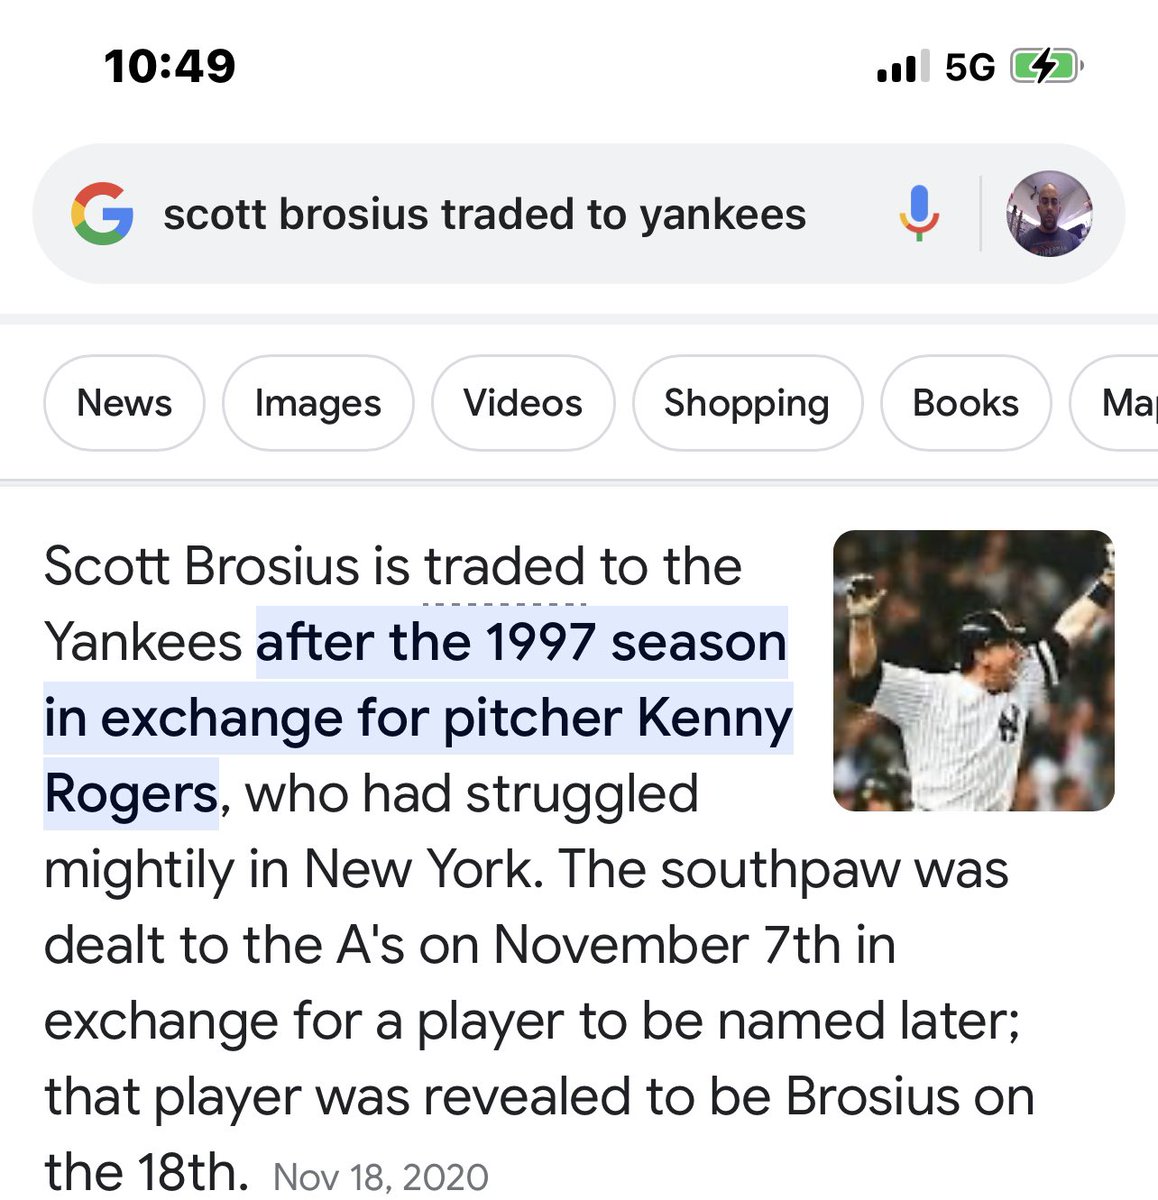 @JayElCee121 @JcarolNj @mike_daddino Did you forget to mention the key trades he made? Like brosis?